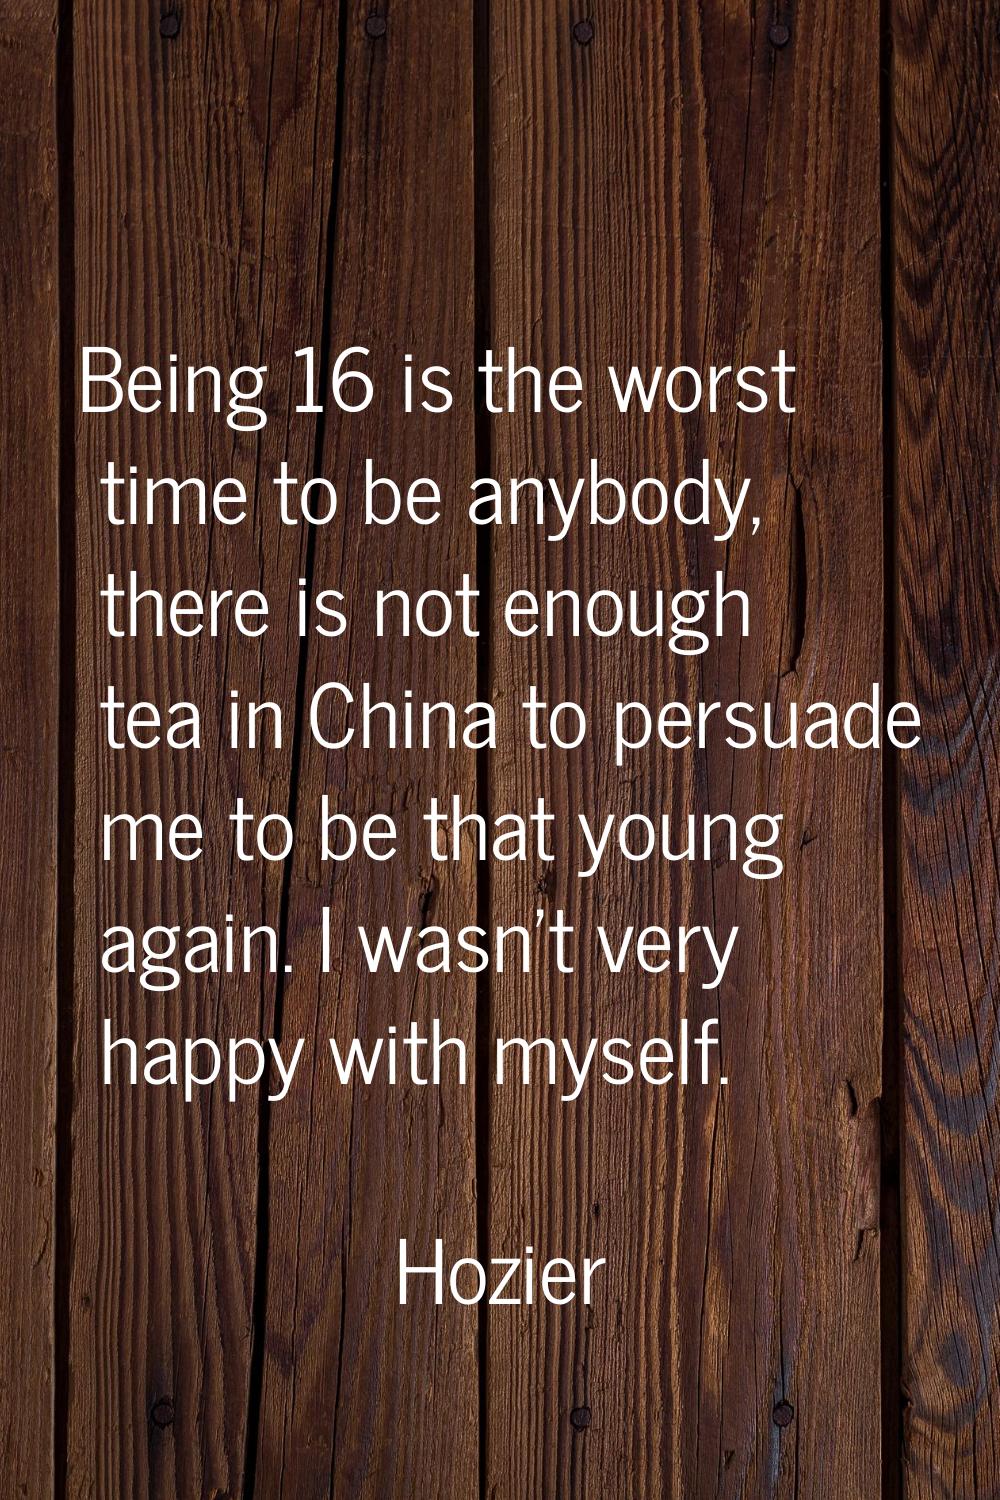 Being 16 is the worst time to be anybody, there is not enough tea in China to persuade me to be tha